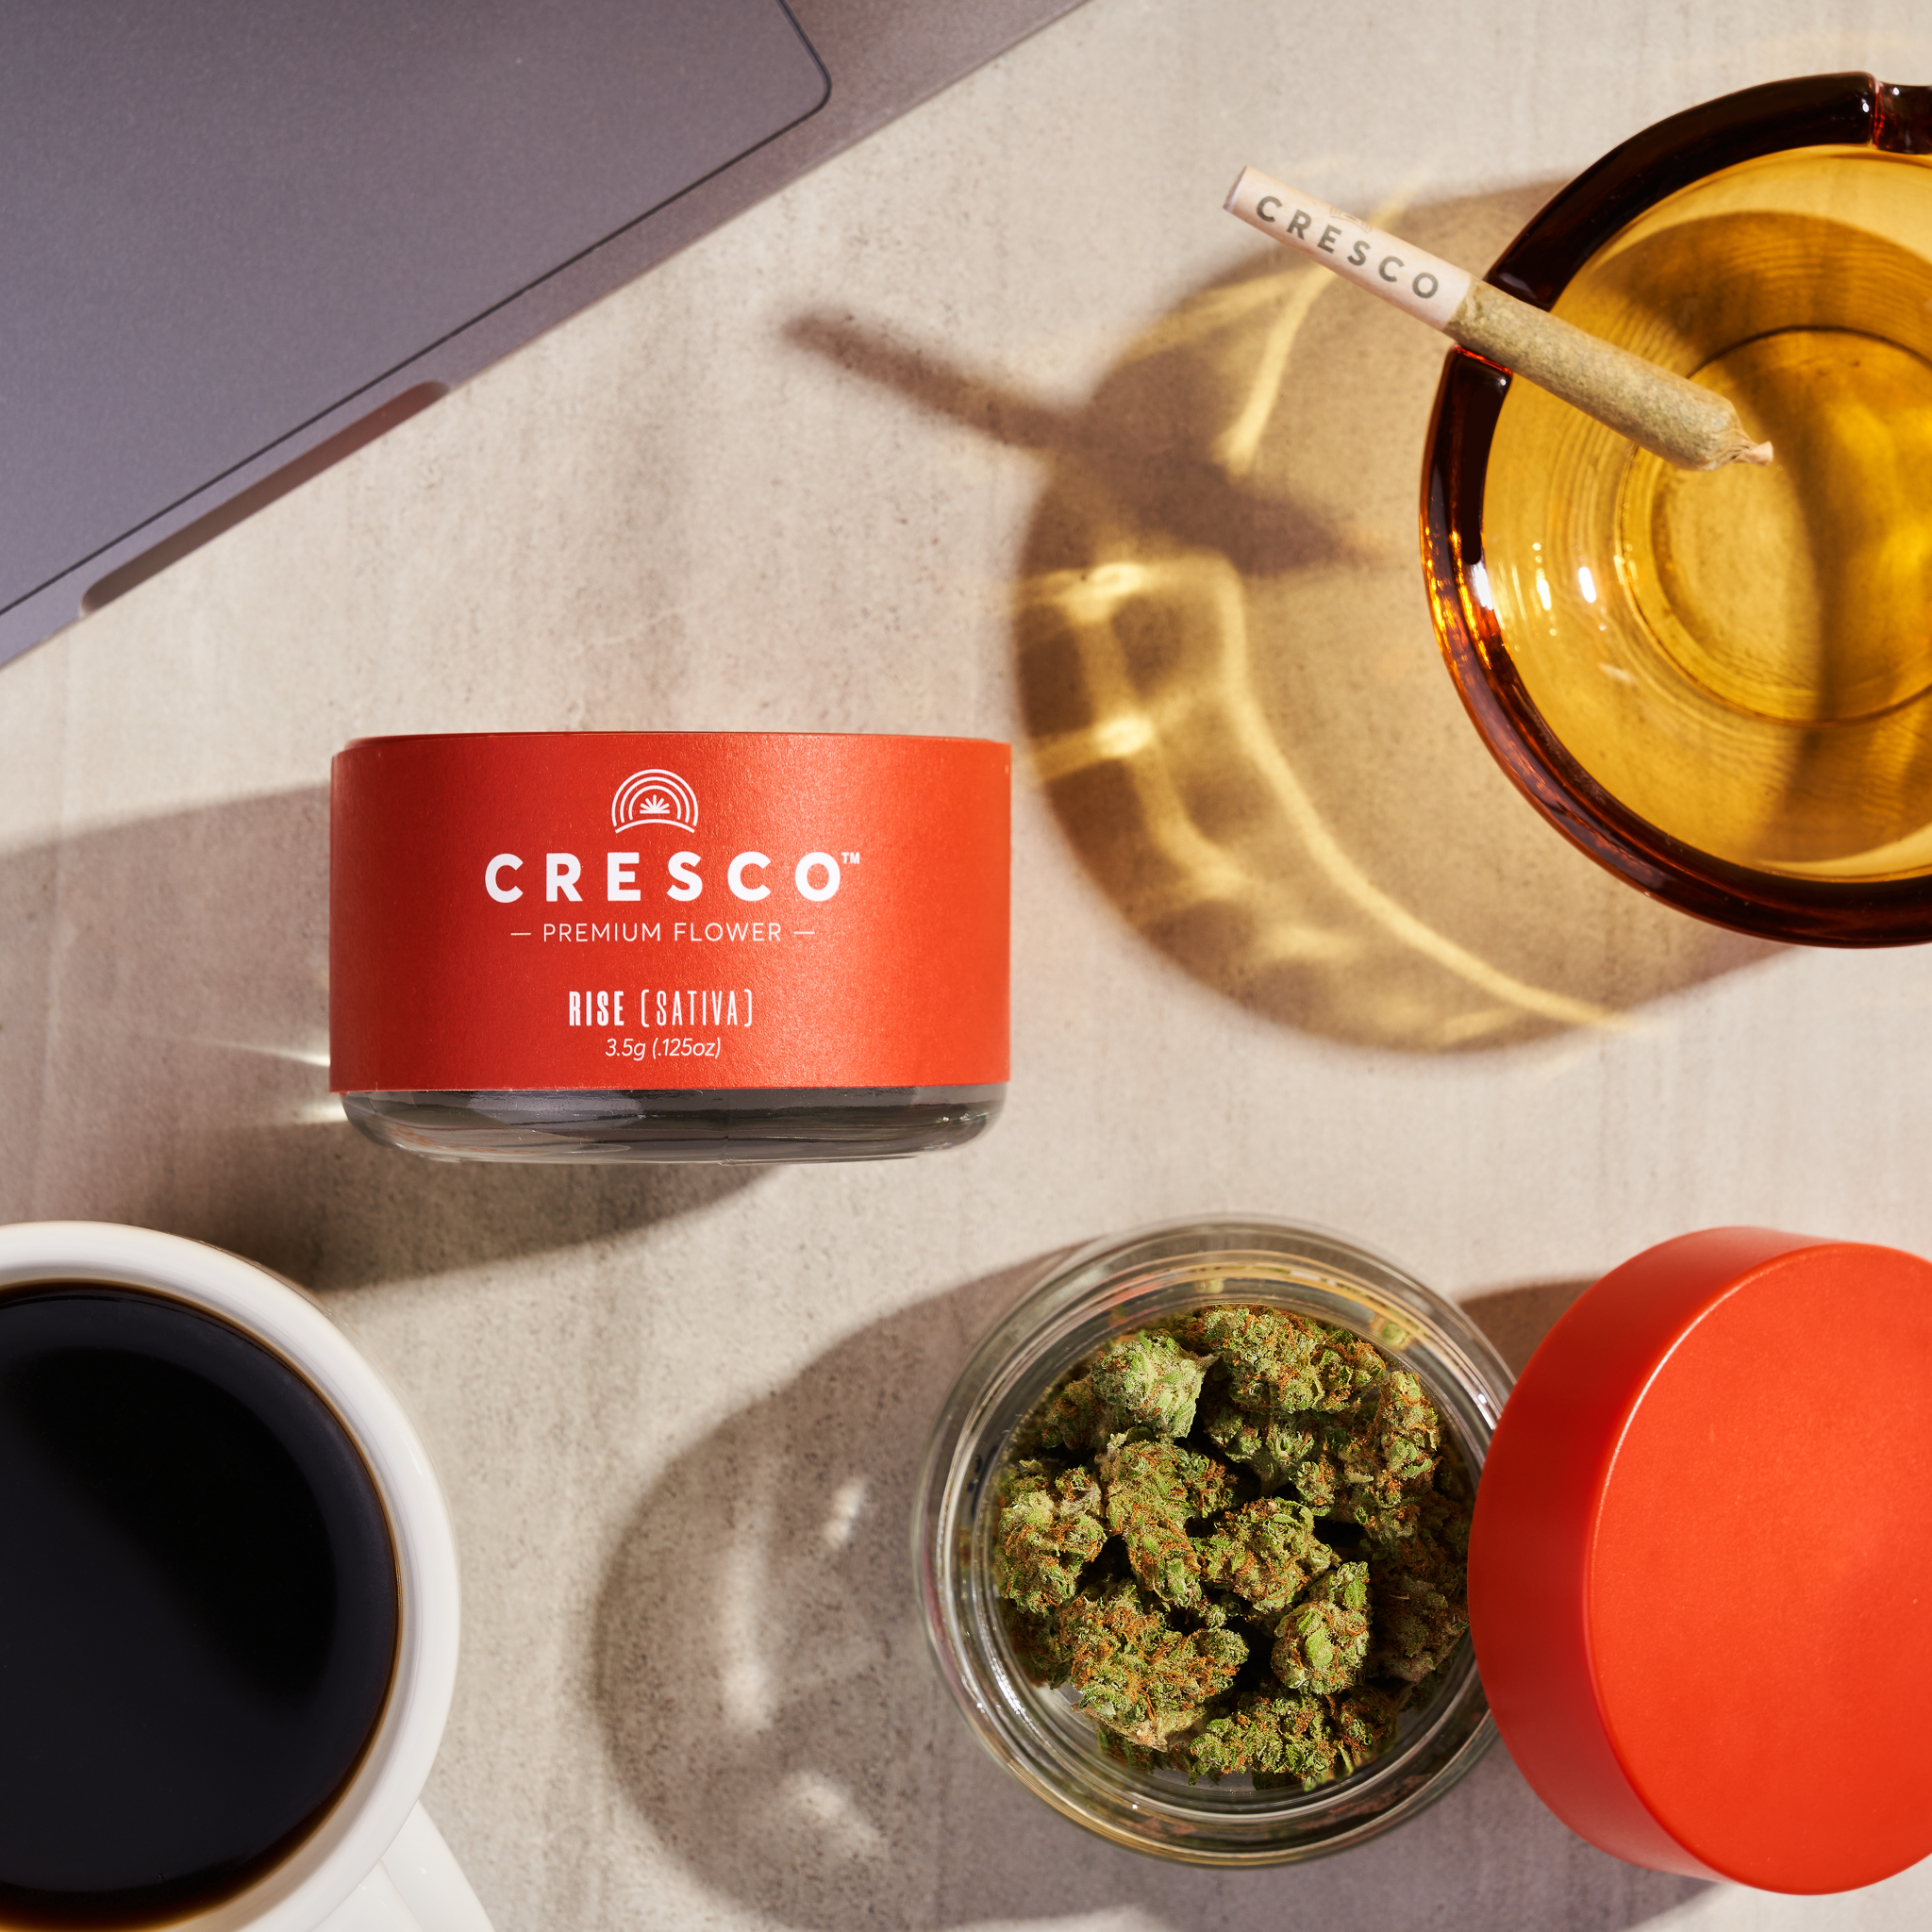 Cresco sativa flower, pre-rolled shortie and coffee.